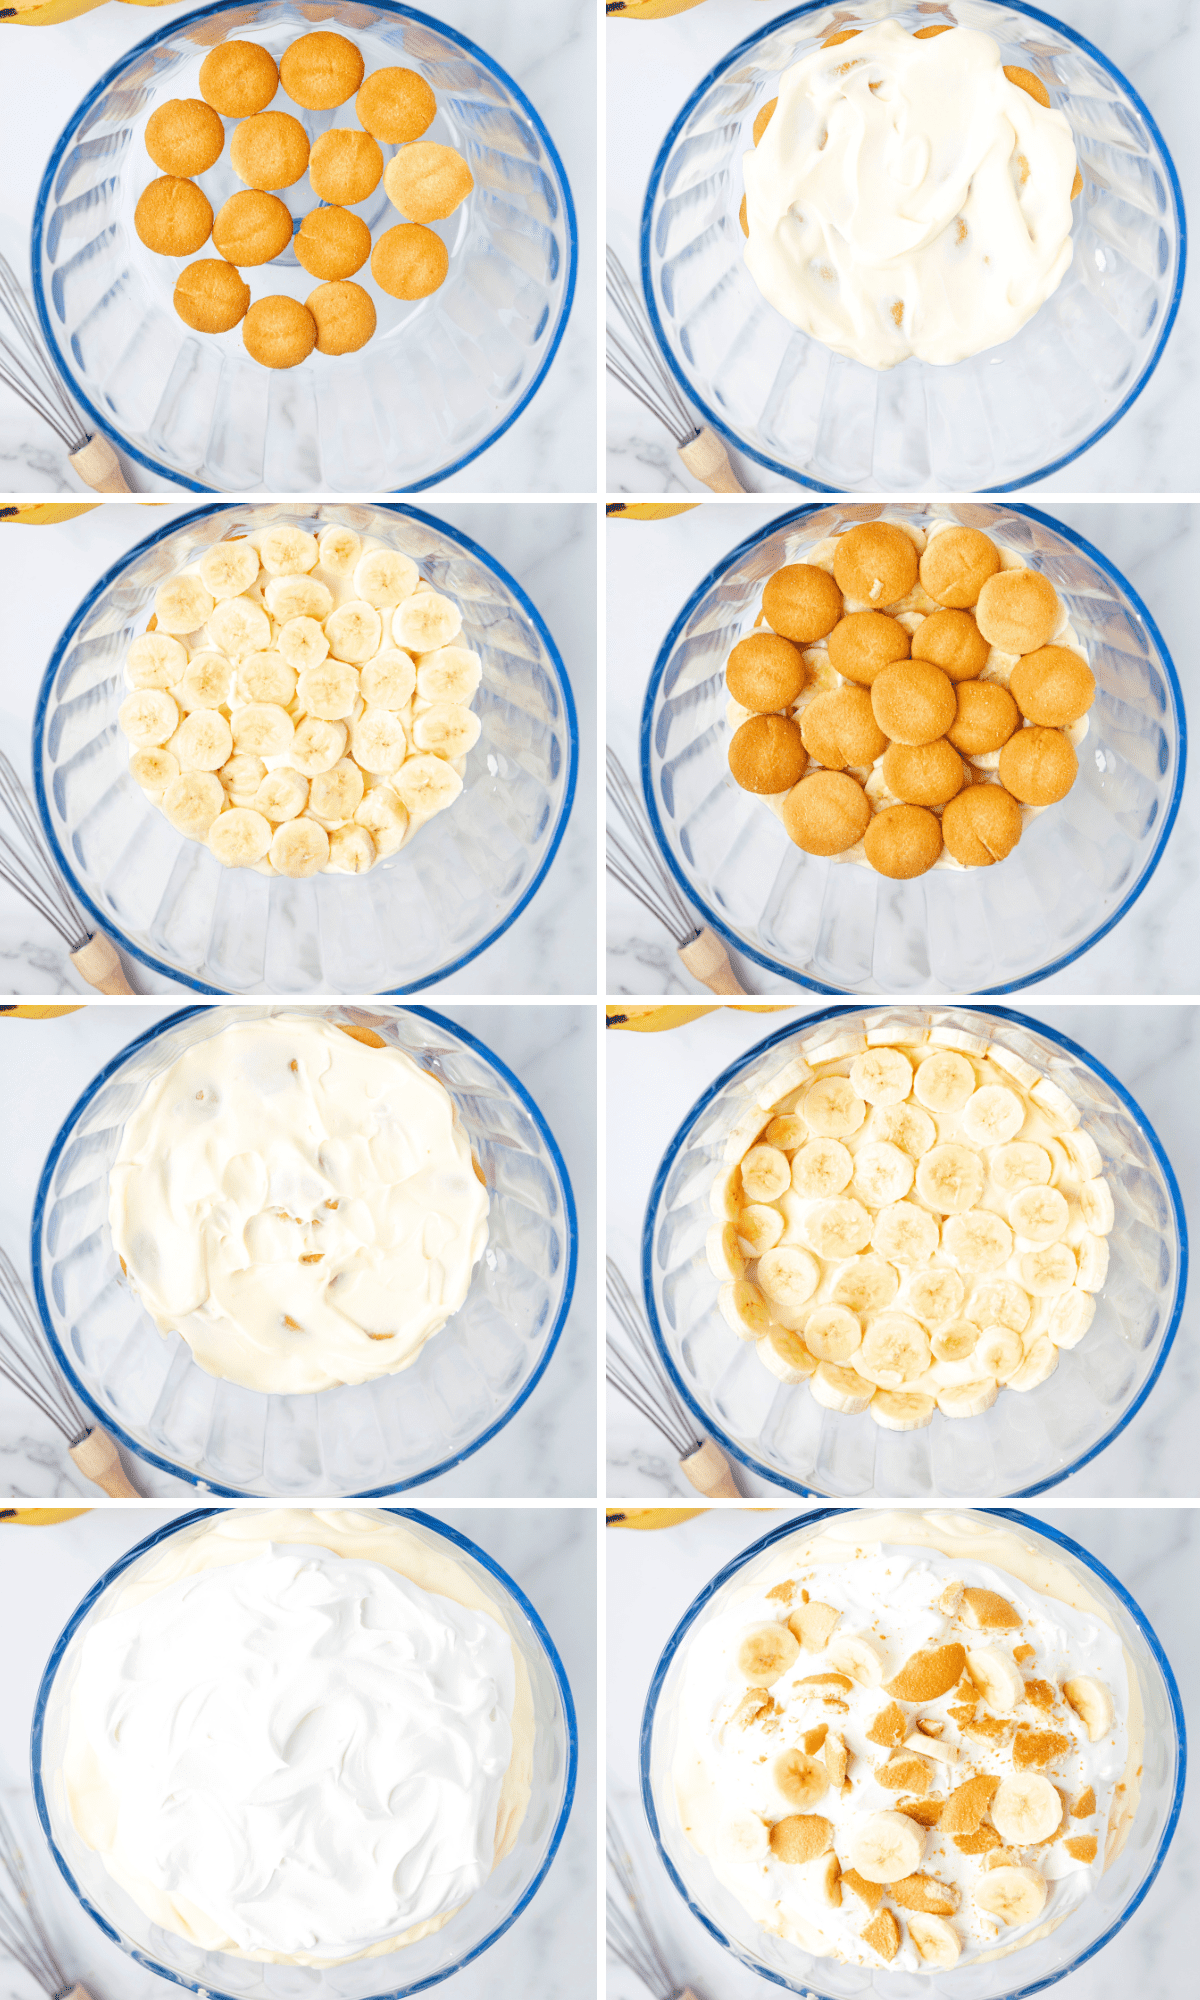 a grid of images showing the steps of layering an easy banana pudding recipe, starting with vanilla wafers, pudding, bananas, then more vanilla wafers, more pudding, then more bananas, then topped with cool whip, crushed vanilla wafers and slices of bananas